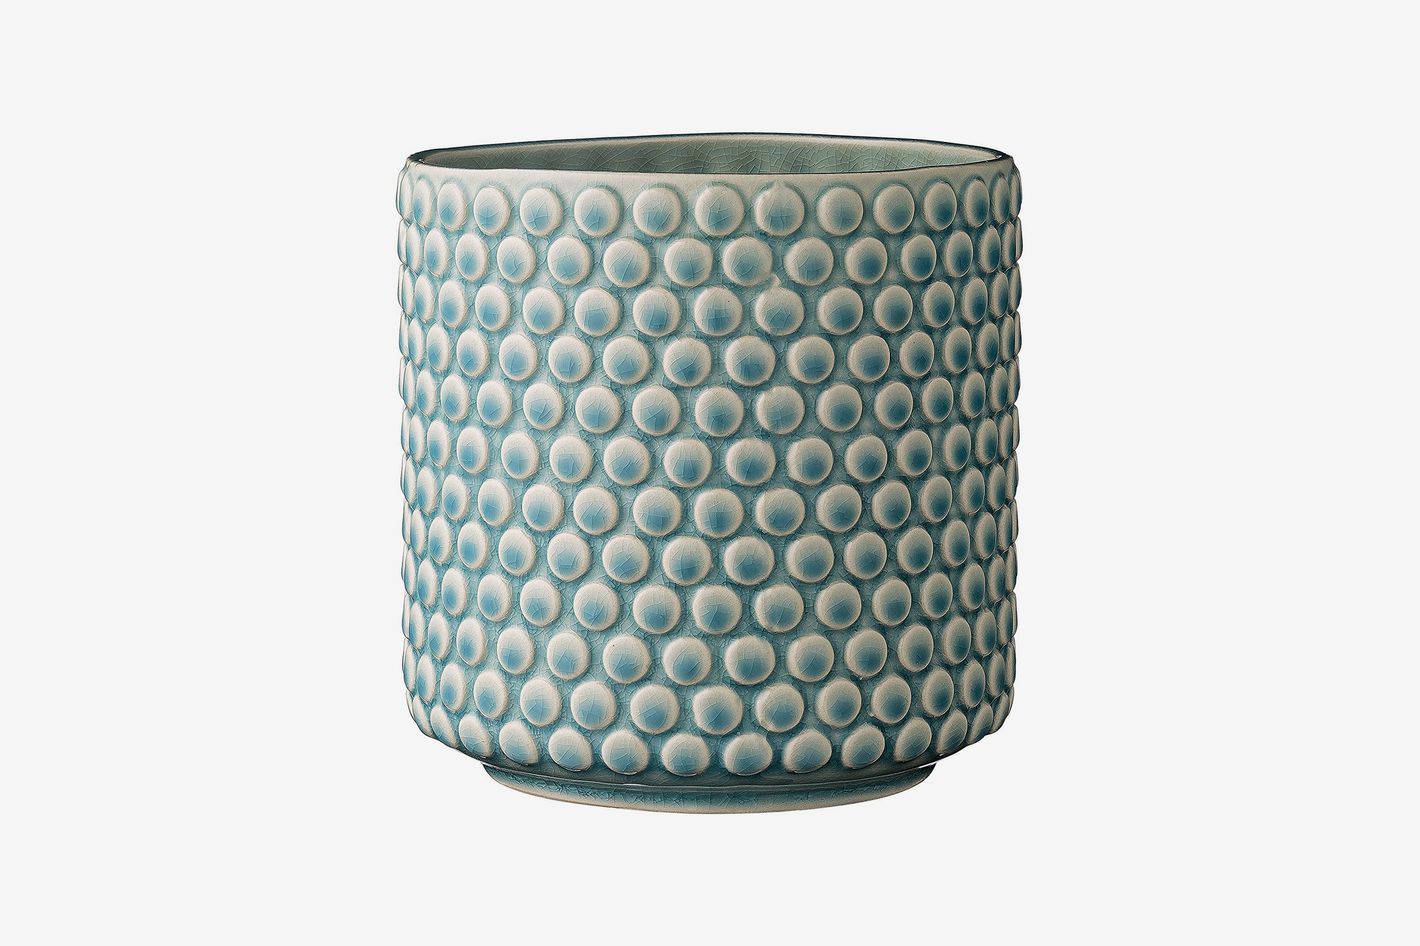 Cachepot Cover Pot Teal and Terracotta Geometric Ceramic Planter